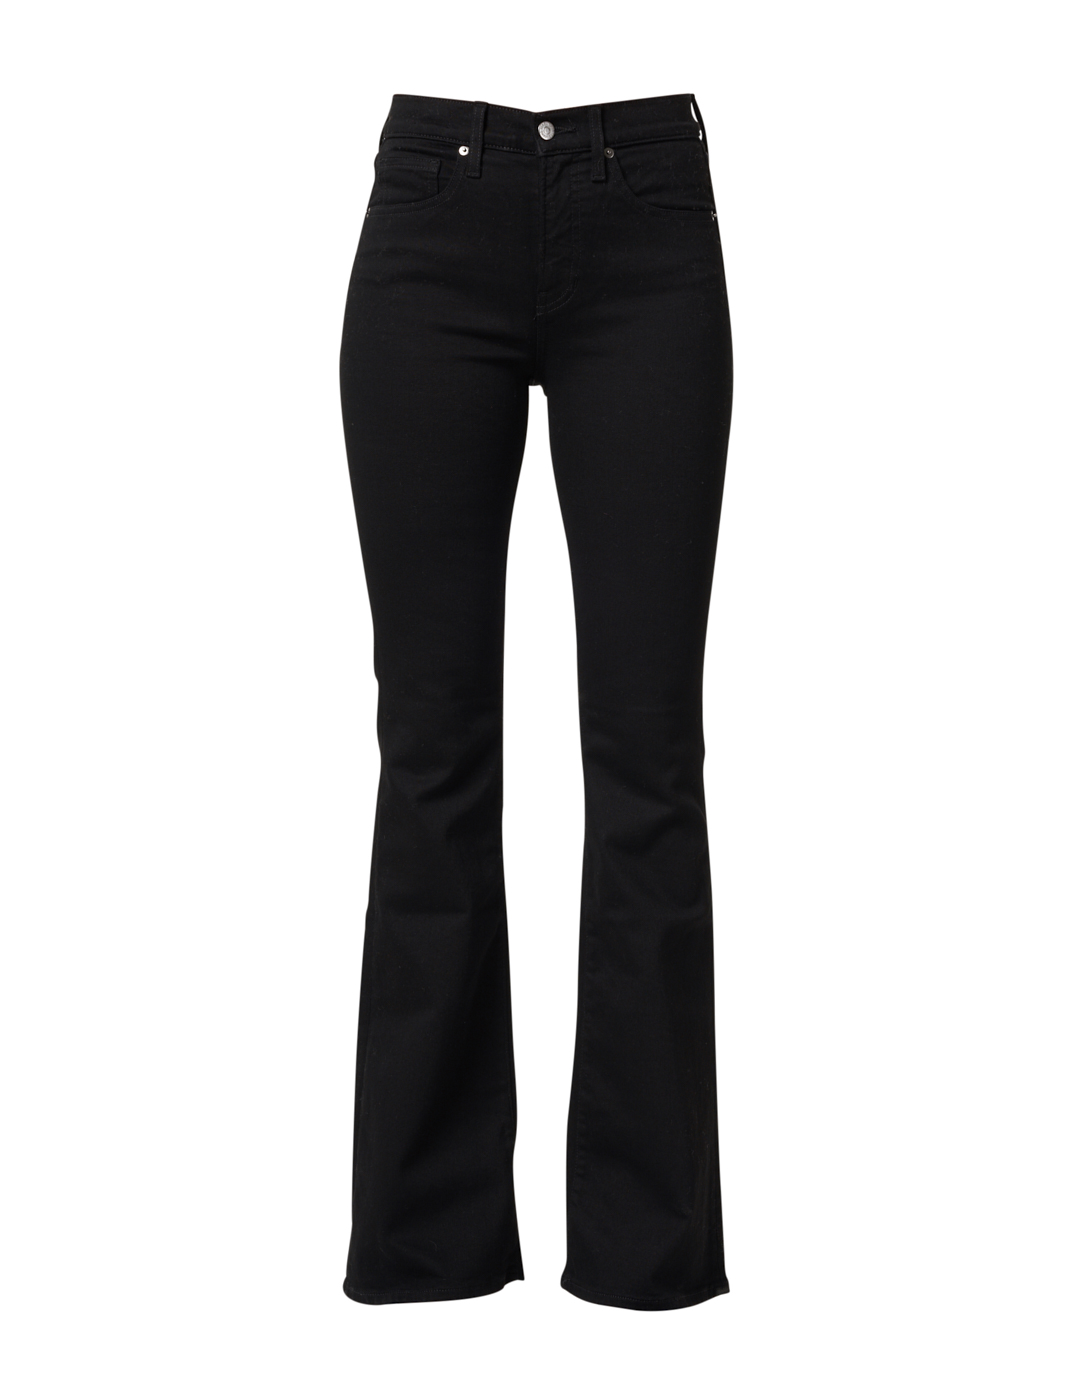 Beverly High Rise Super Flare Jeans